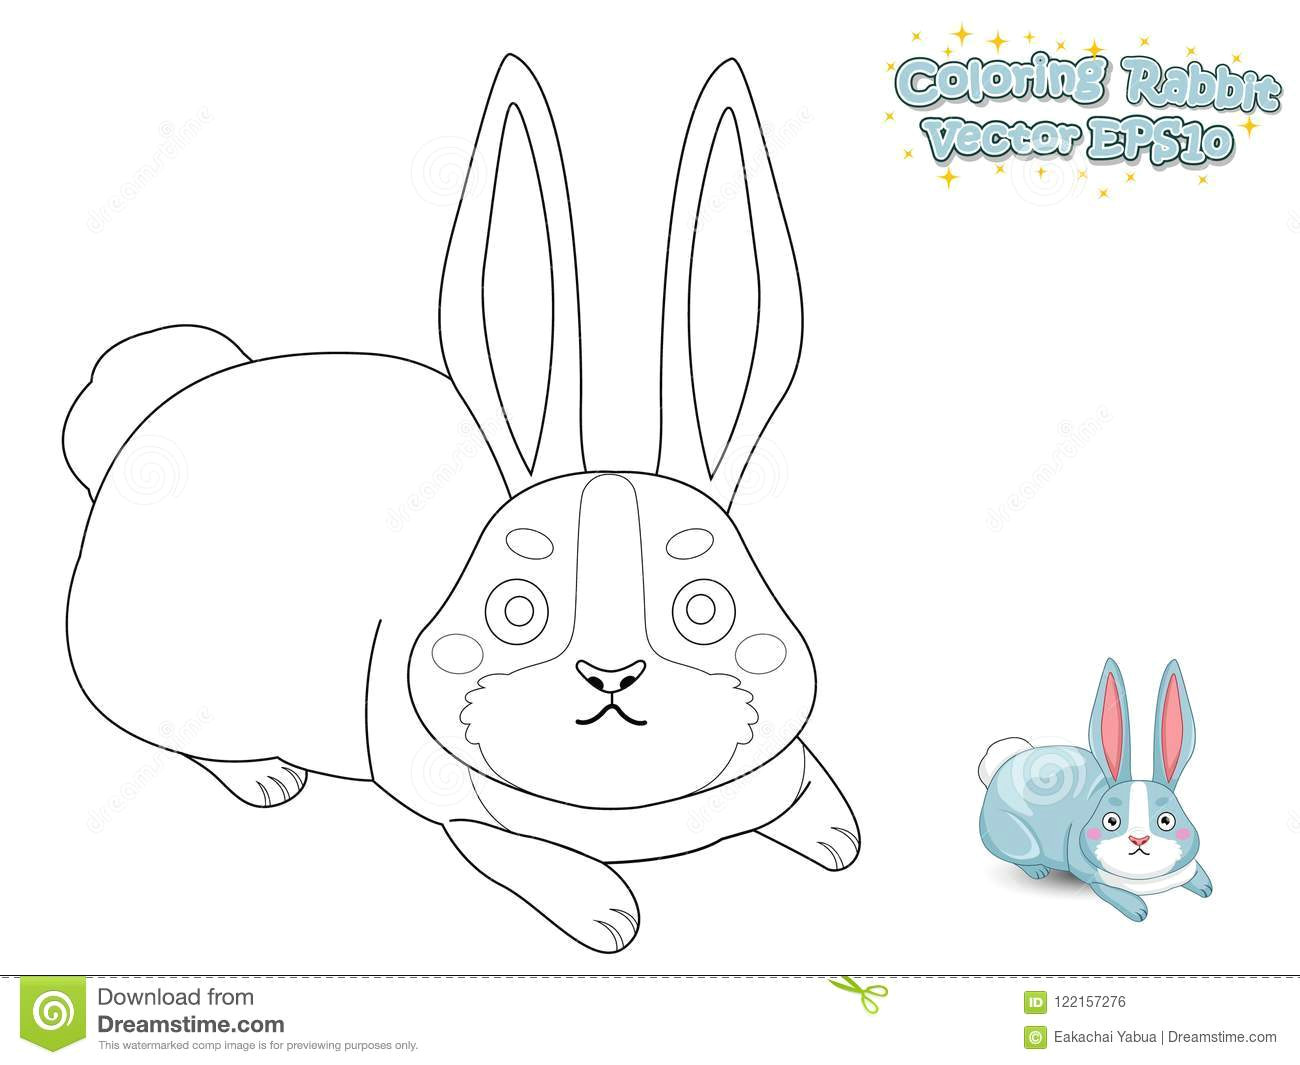 Drawing Cartoons On Illustrator Coloring the Cute Cartoon Rabbit Educational Game for Kids Vector